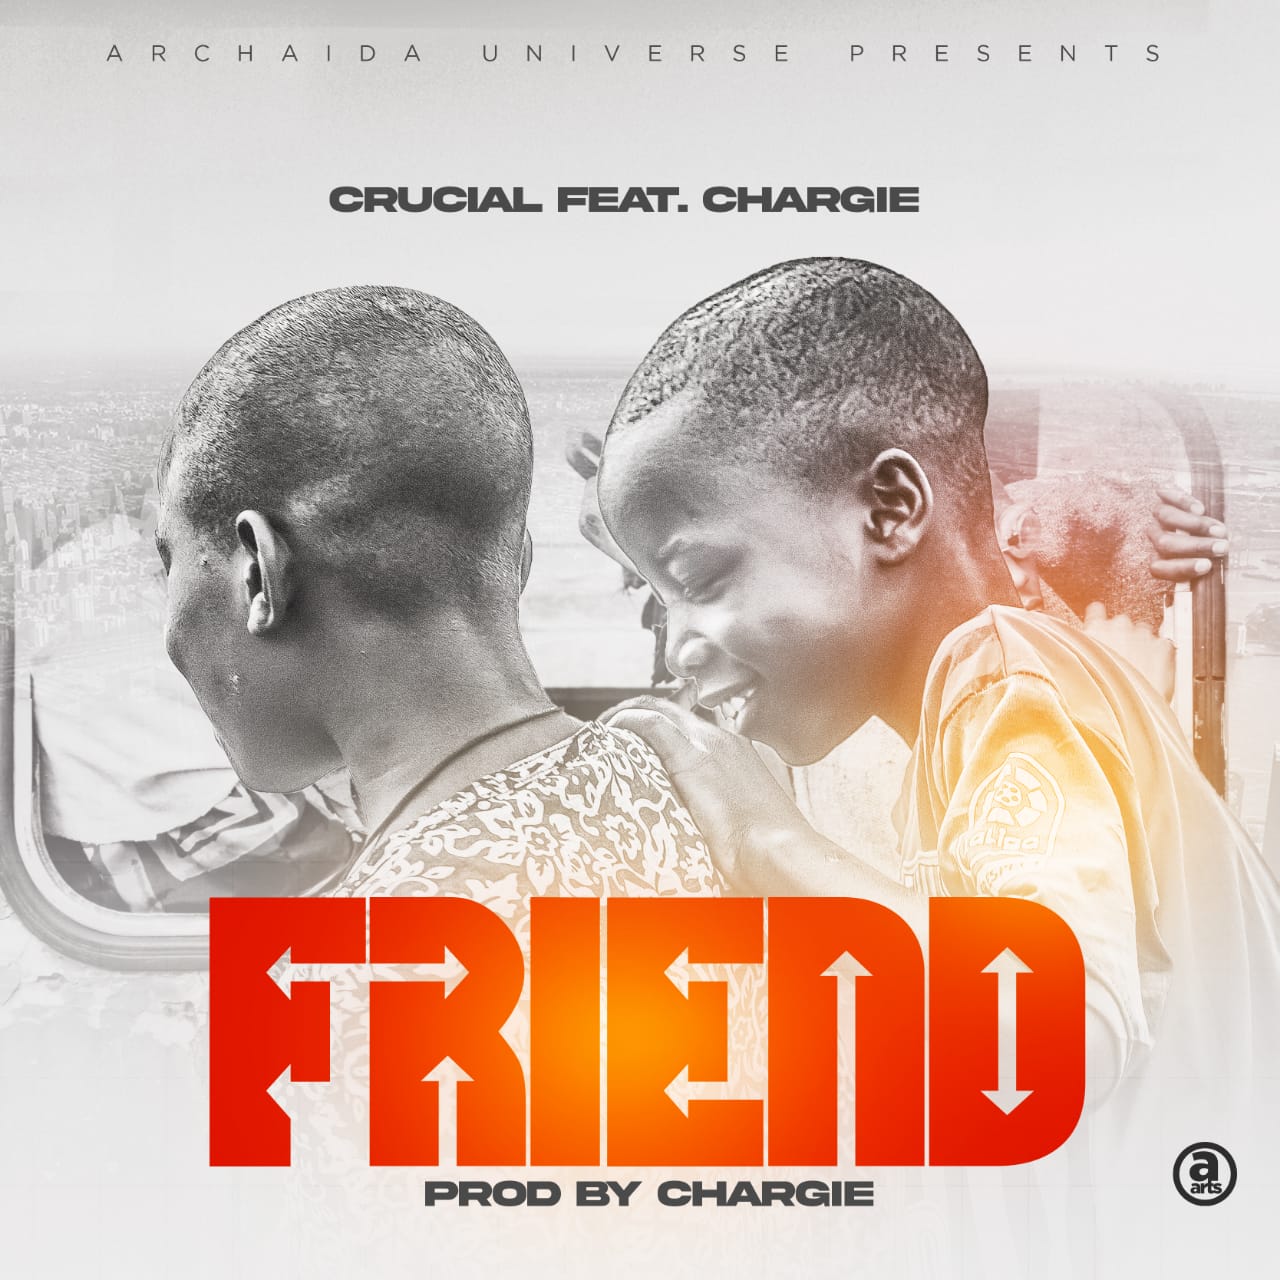 Crucial-ft-chargie_friend_prod-by-chargie